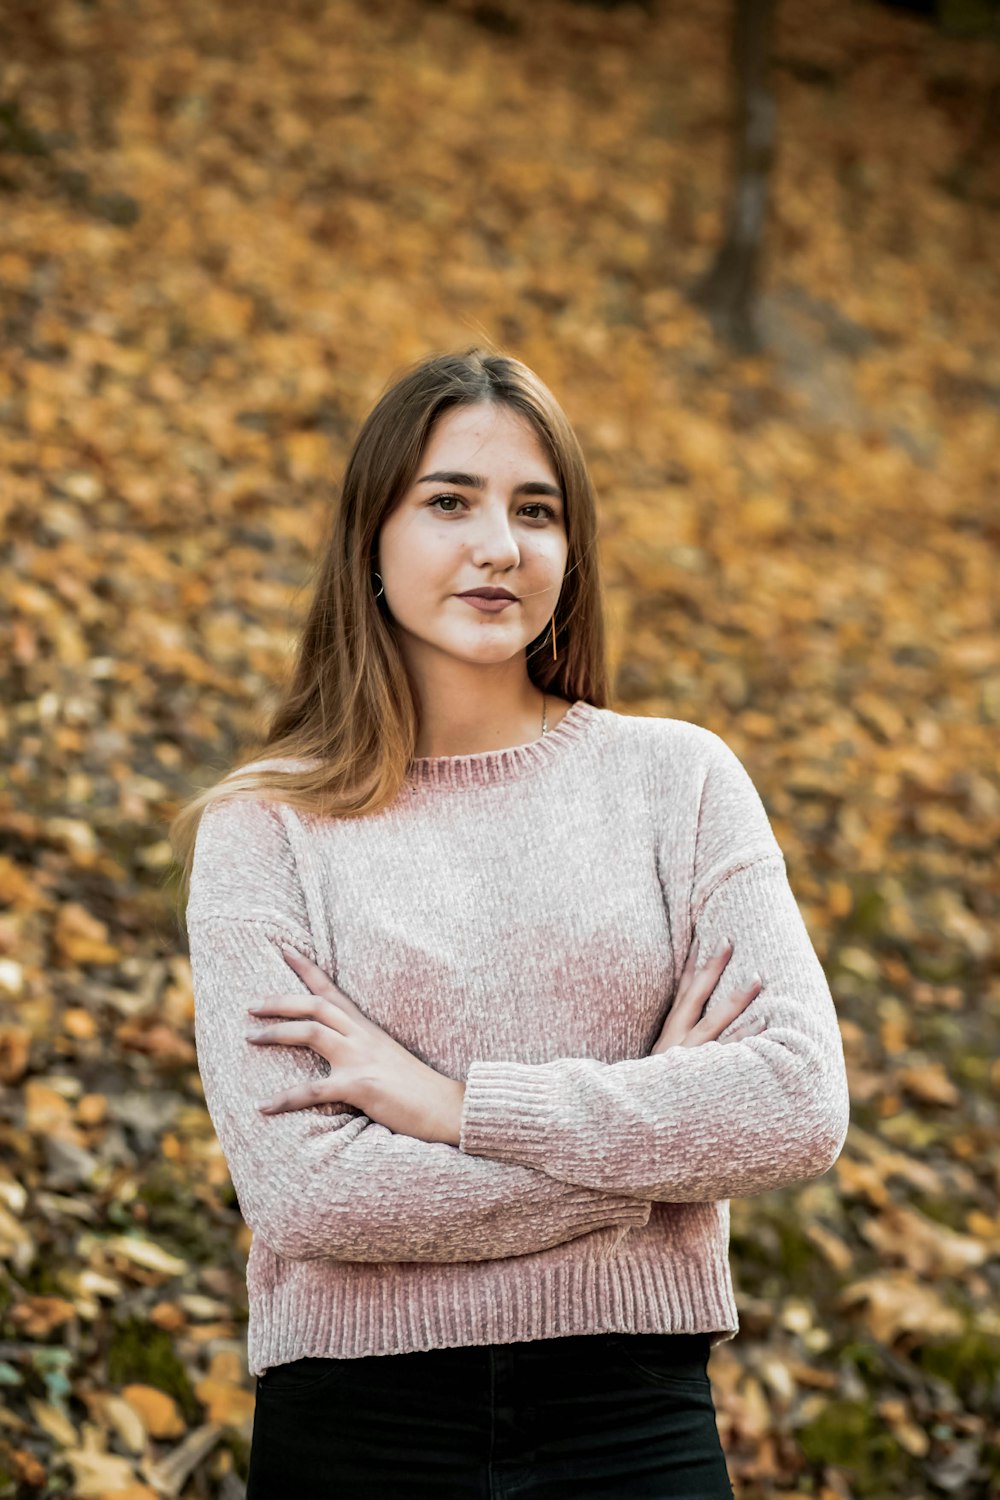 woman in gray sweater standing on brown leaves during daytime